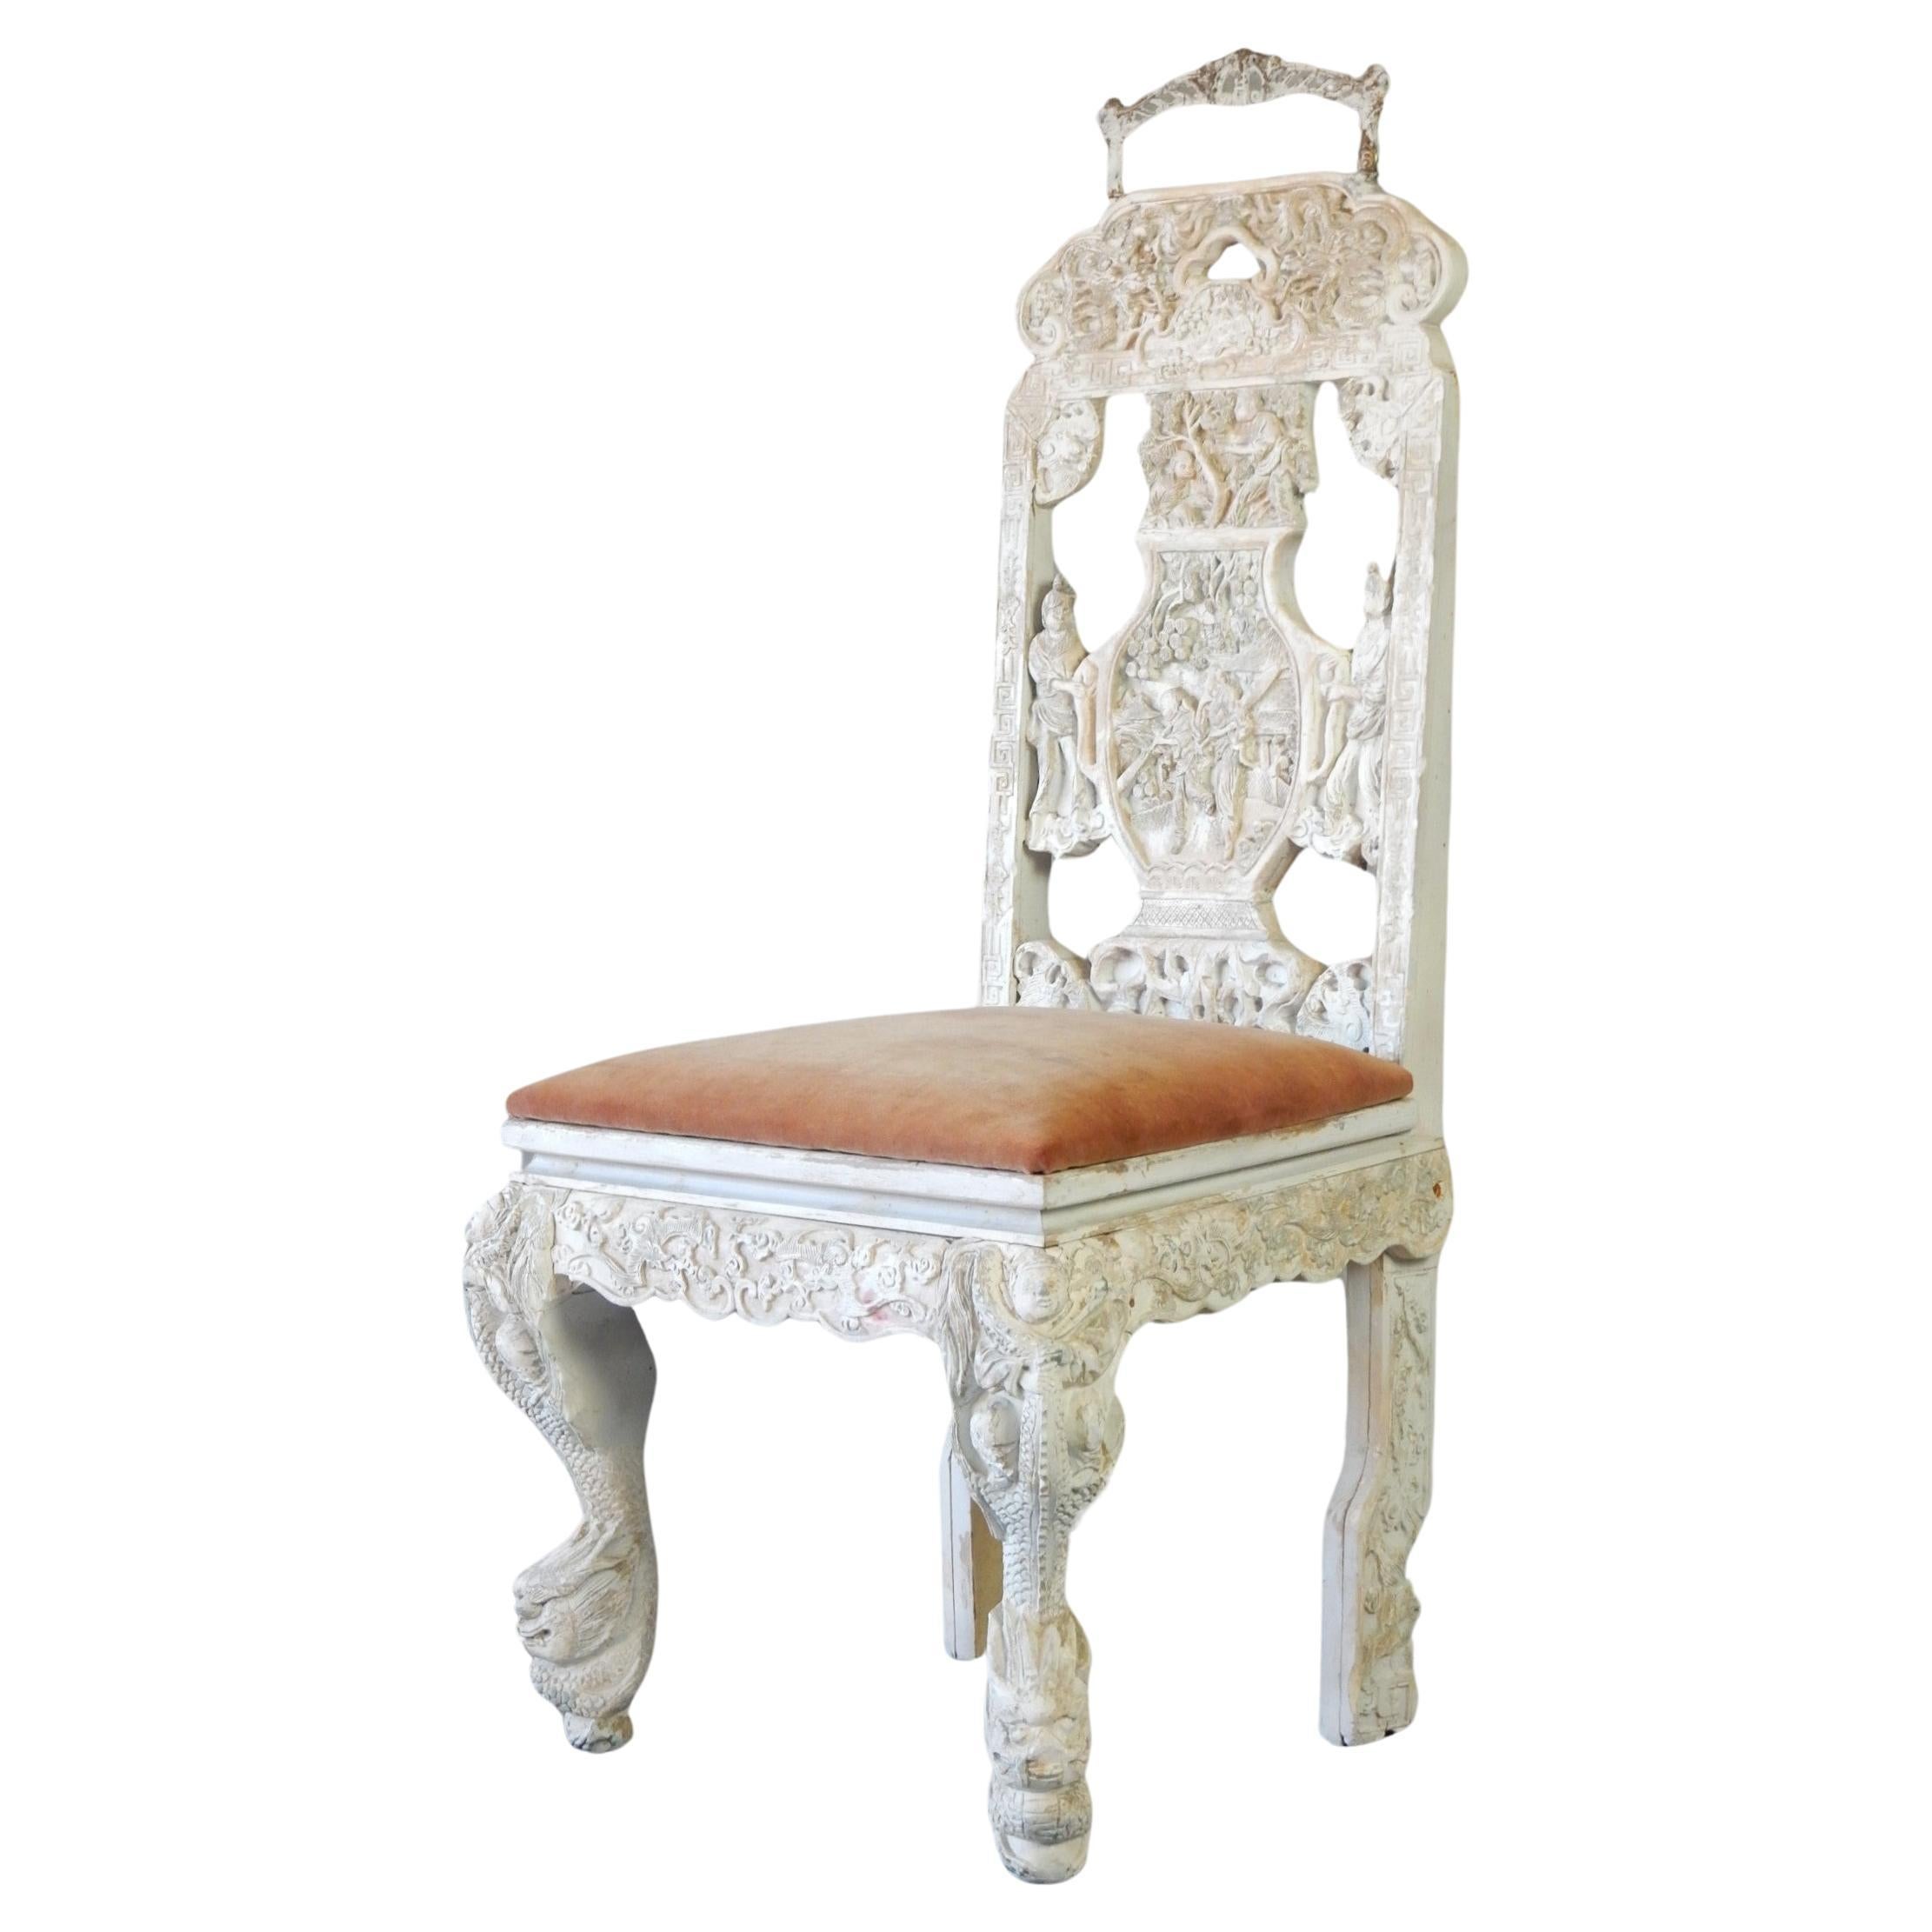 Victorian Chinoiserie era Molded Plaster Chaise Percée Commode Chair  For Sale